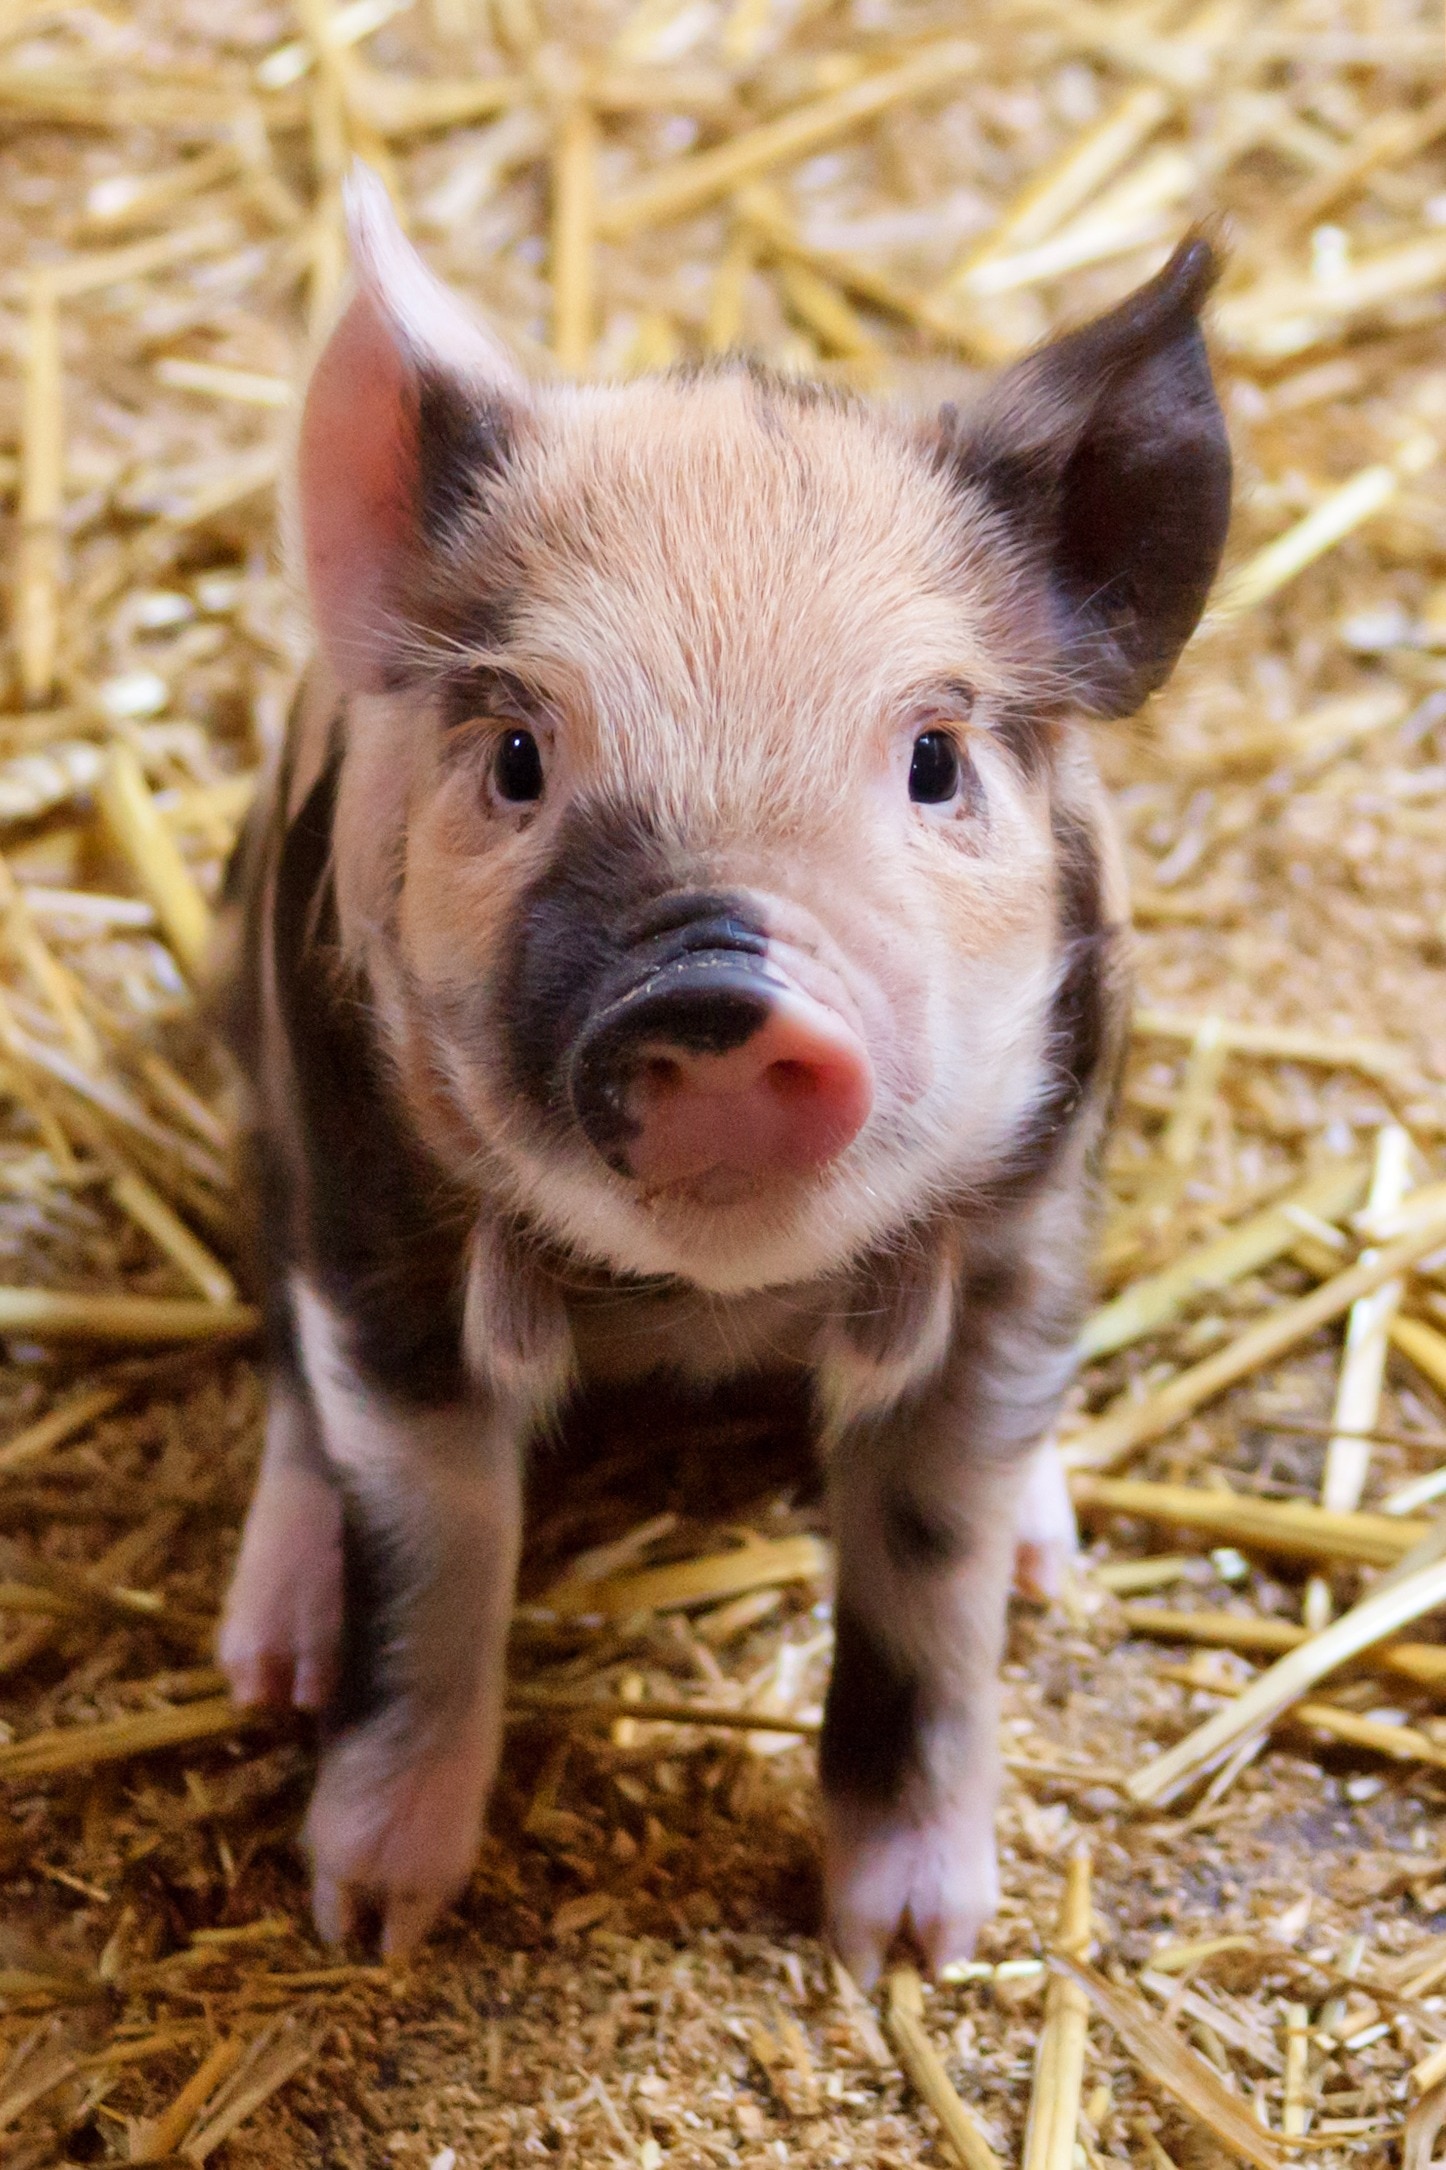 Cute, Agriculture, Animal, Baby, animal themes, one animal